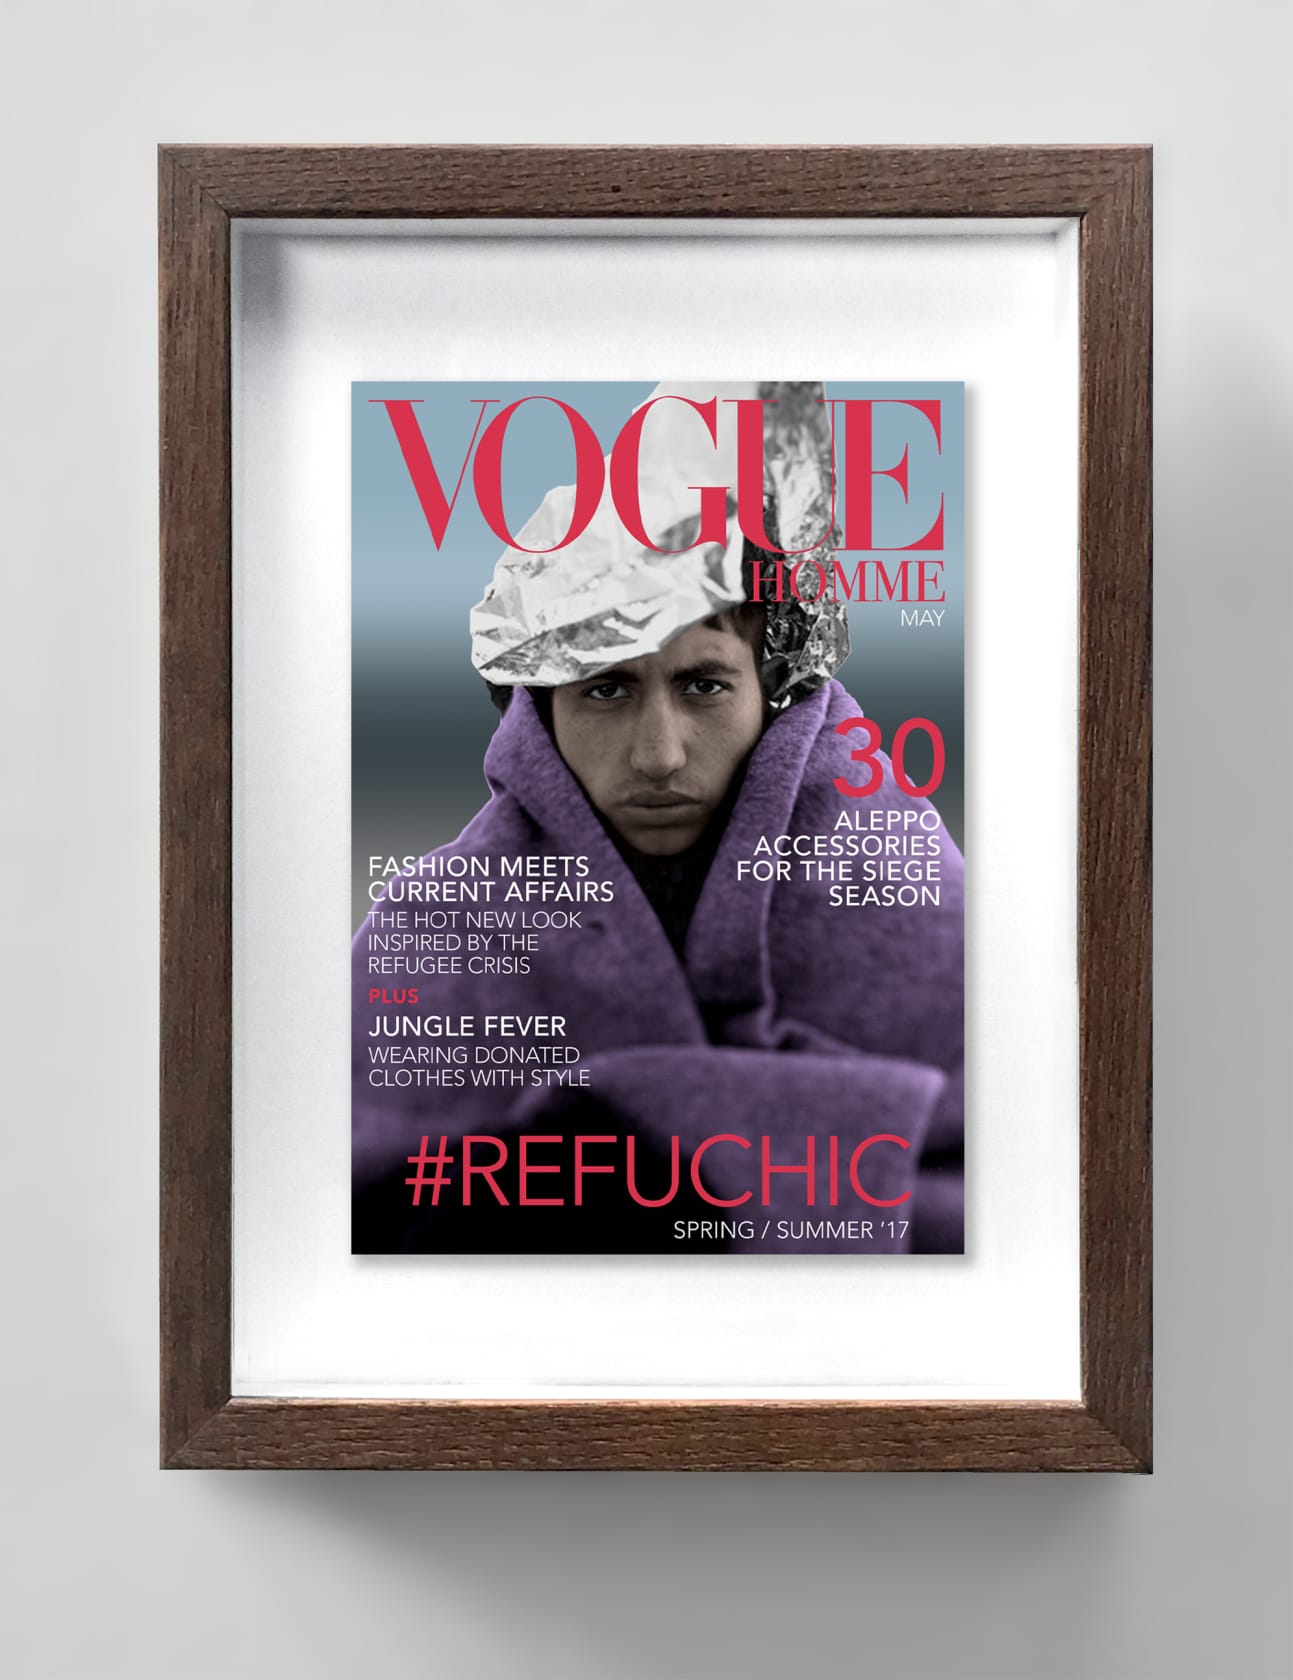 The Connor Brothers, Refuchic - Vogue, 2015